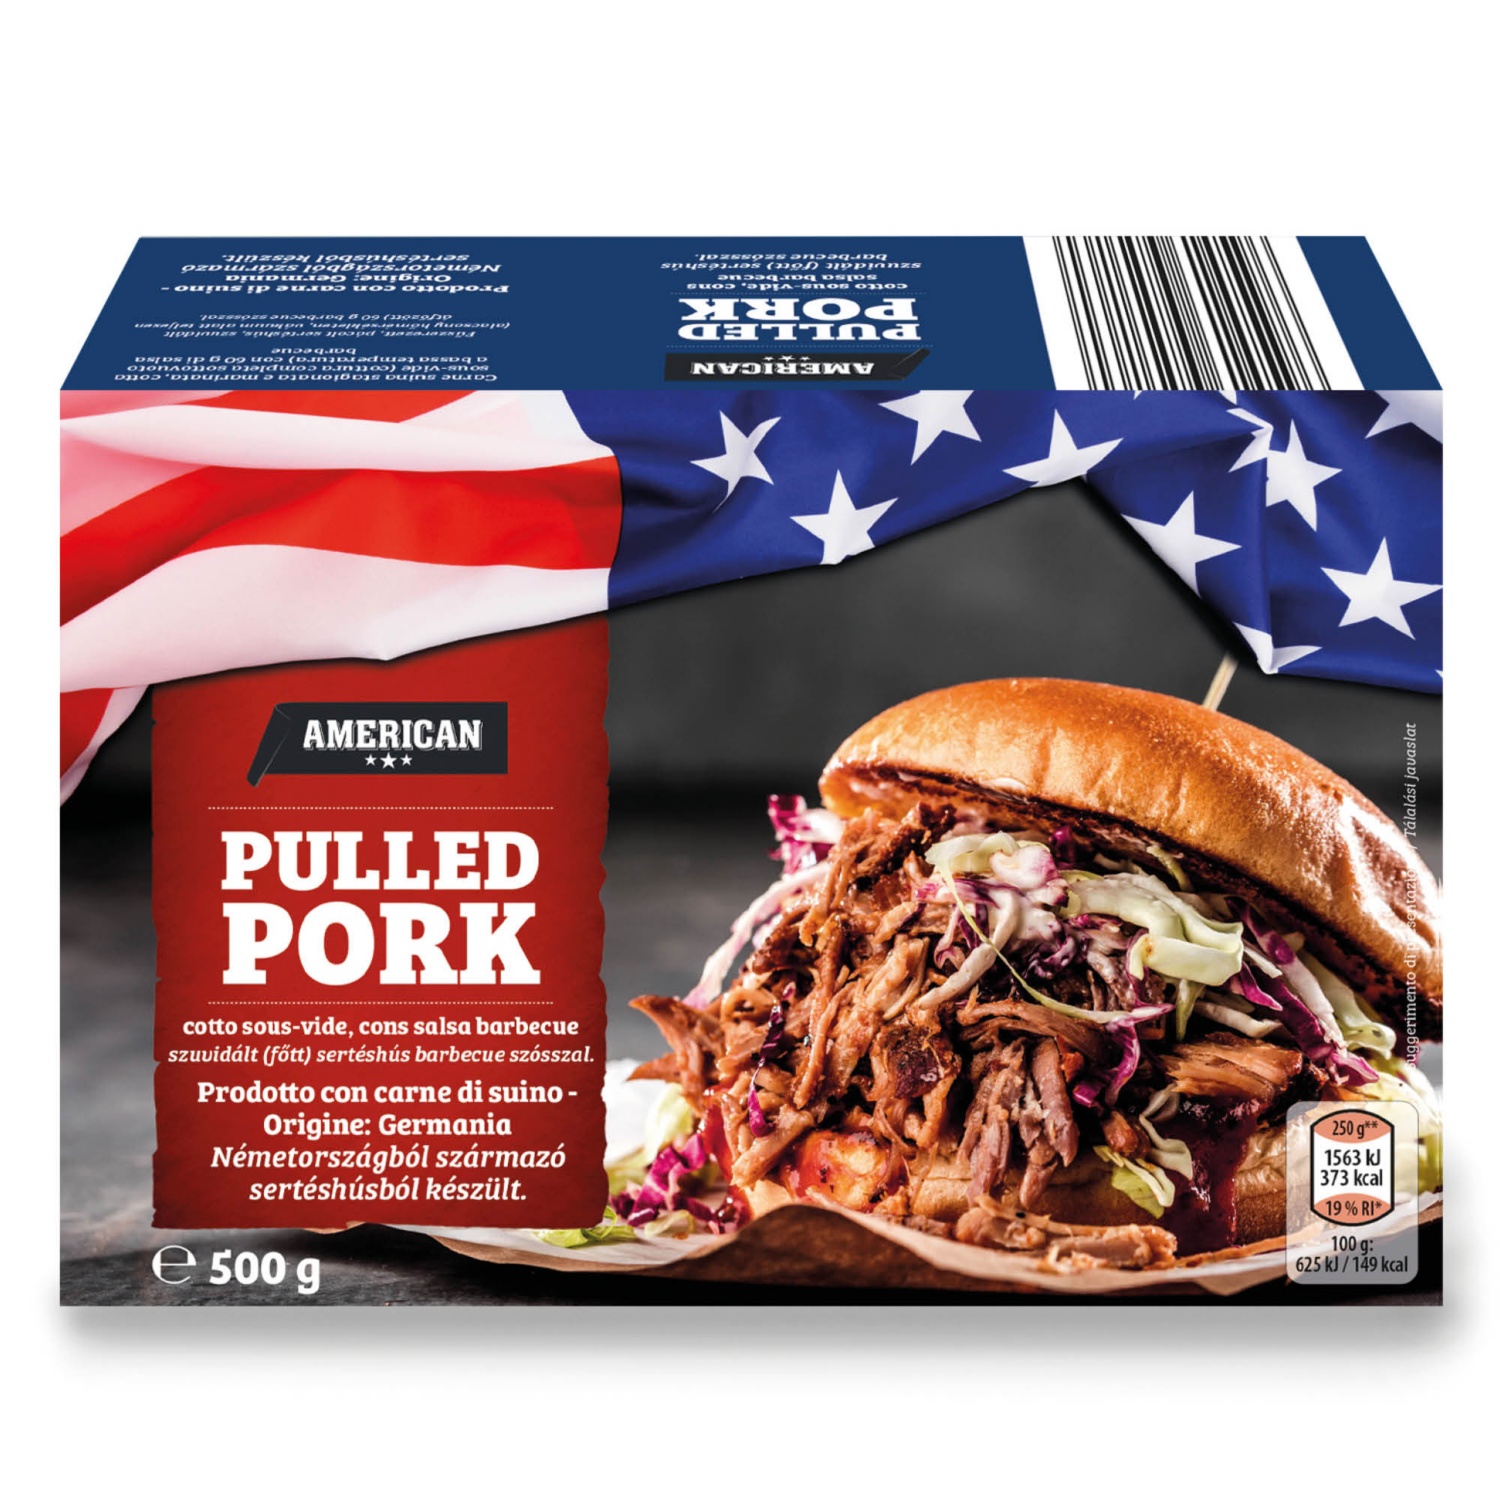 AMERICAN Pulled pork sottovuoto